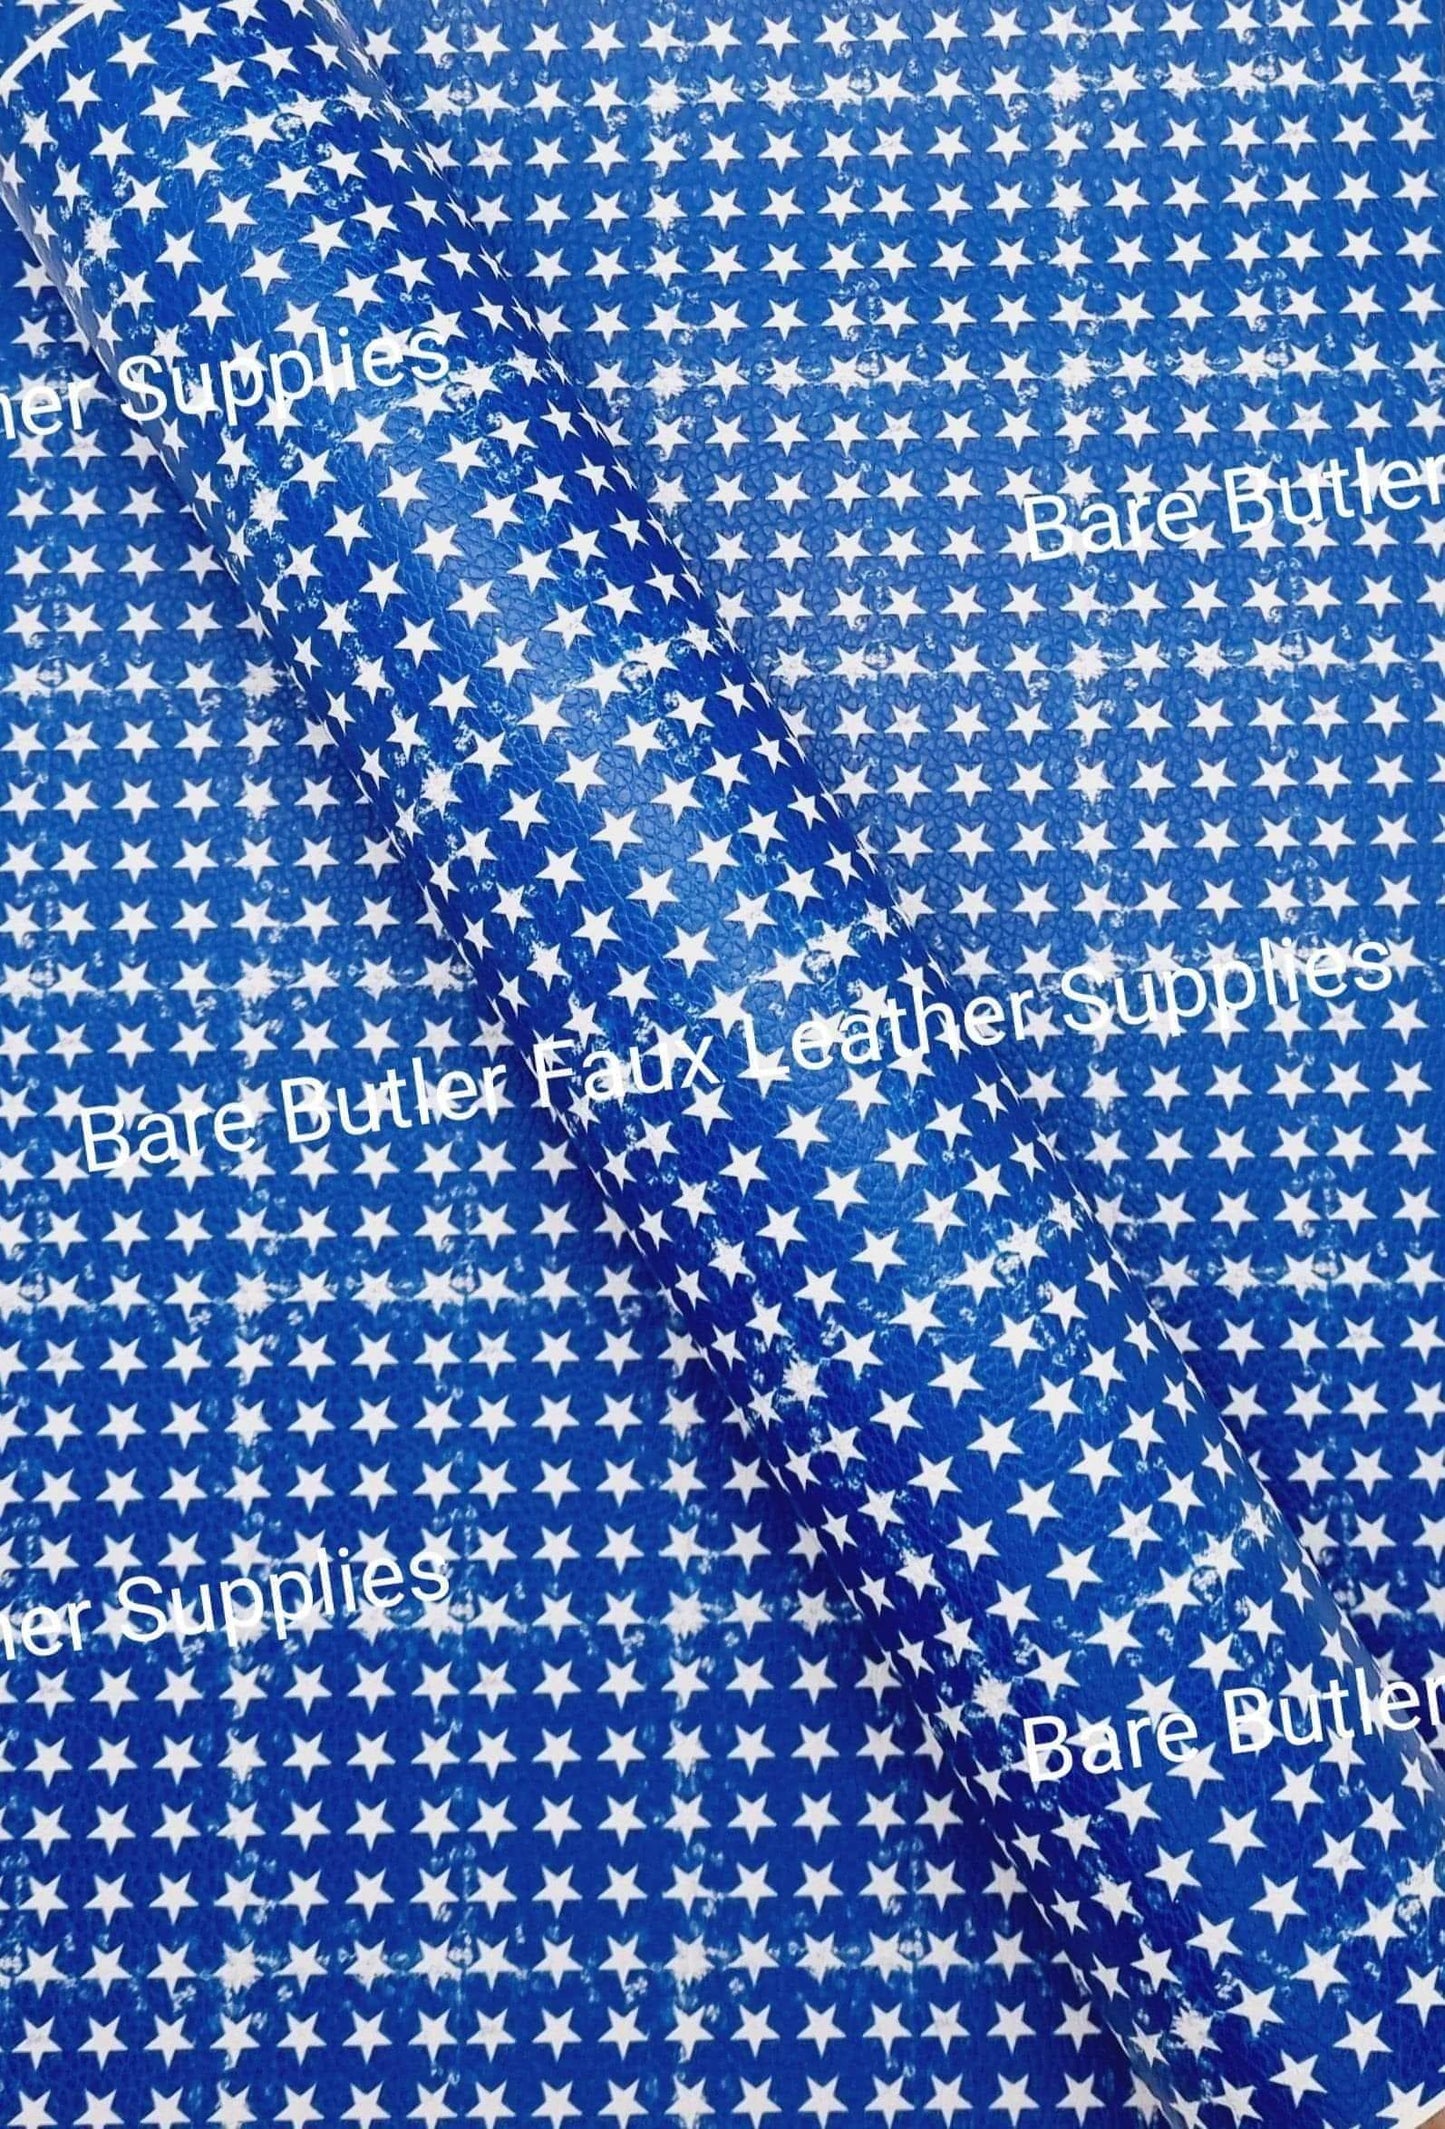 Distressed Blue & White Stars Litchi - Fabric, Faux, Faux Leather, Leather, leatherette, Litchi - Bare Butler Faux Leather Supplies 